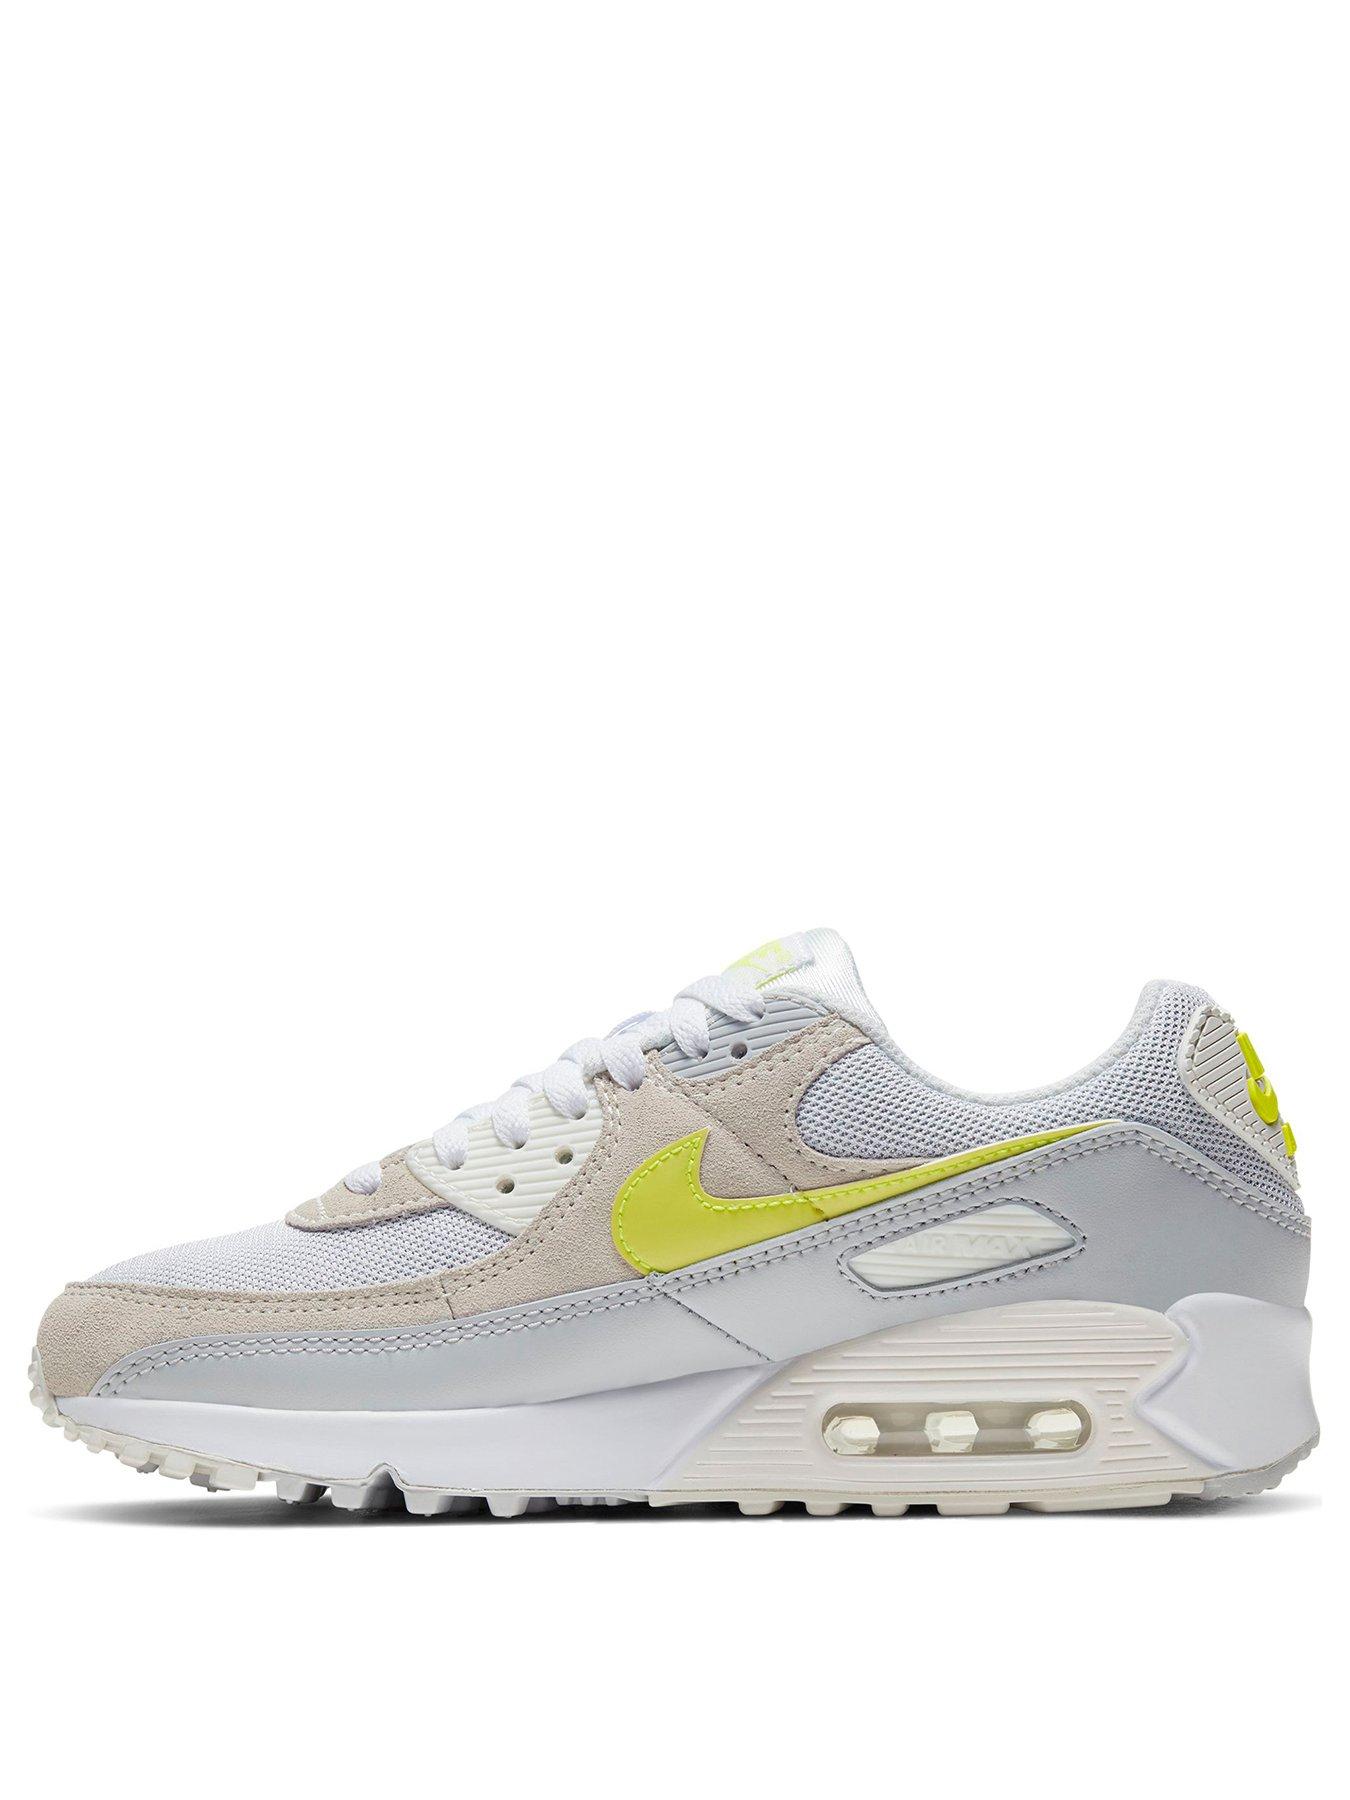 air max 90 white and yellow